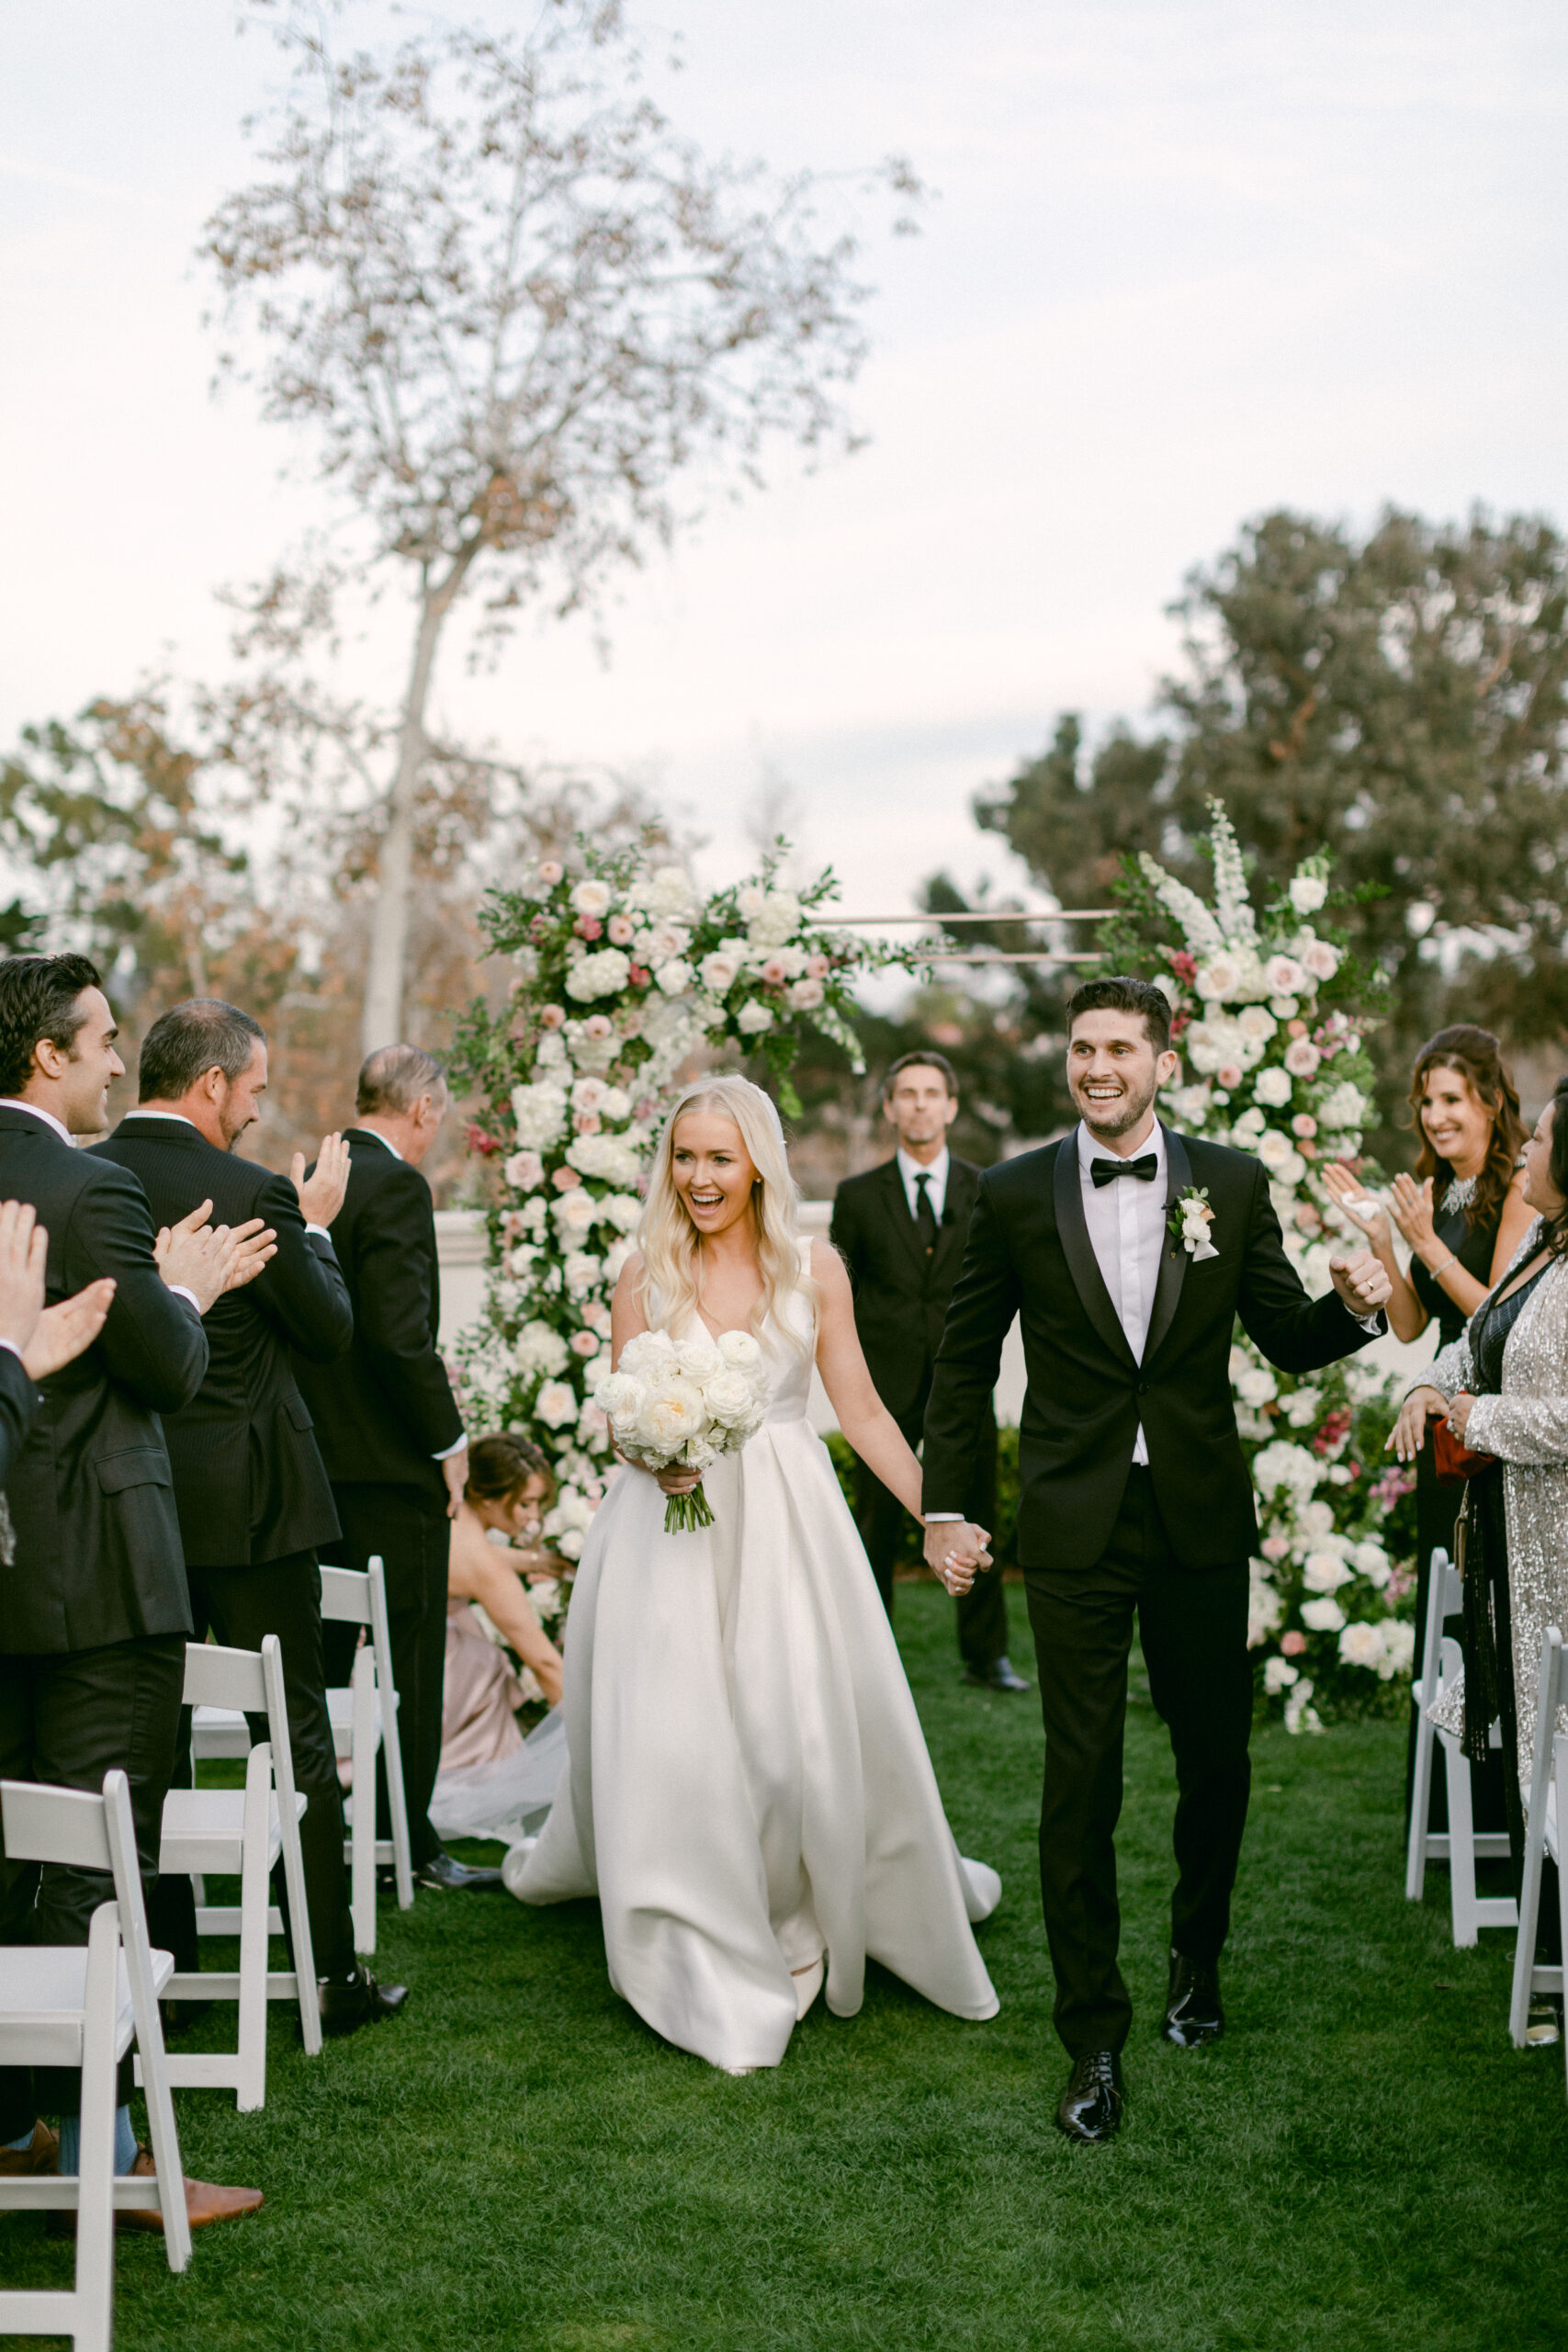 Bride and Groom excitedly exit their wedding ceremony after just being married at Rosewood Miramar in Montecito, CA.